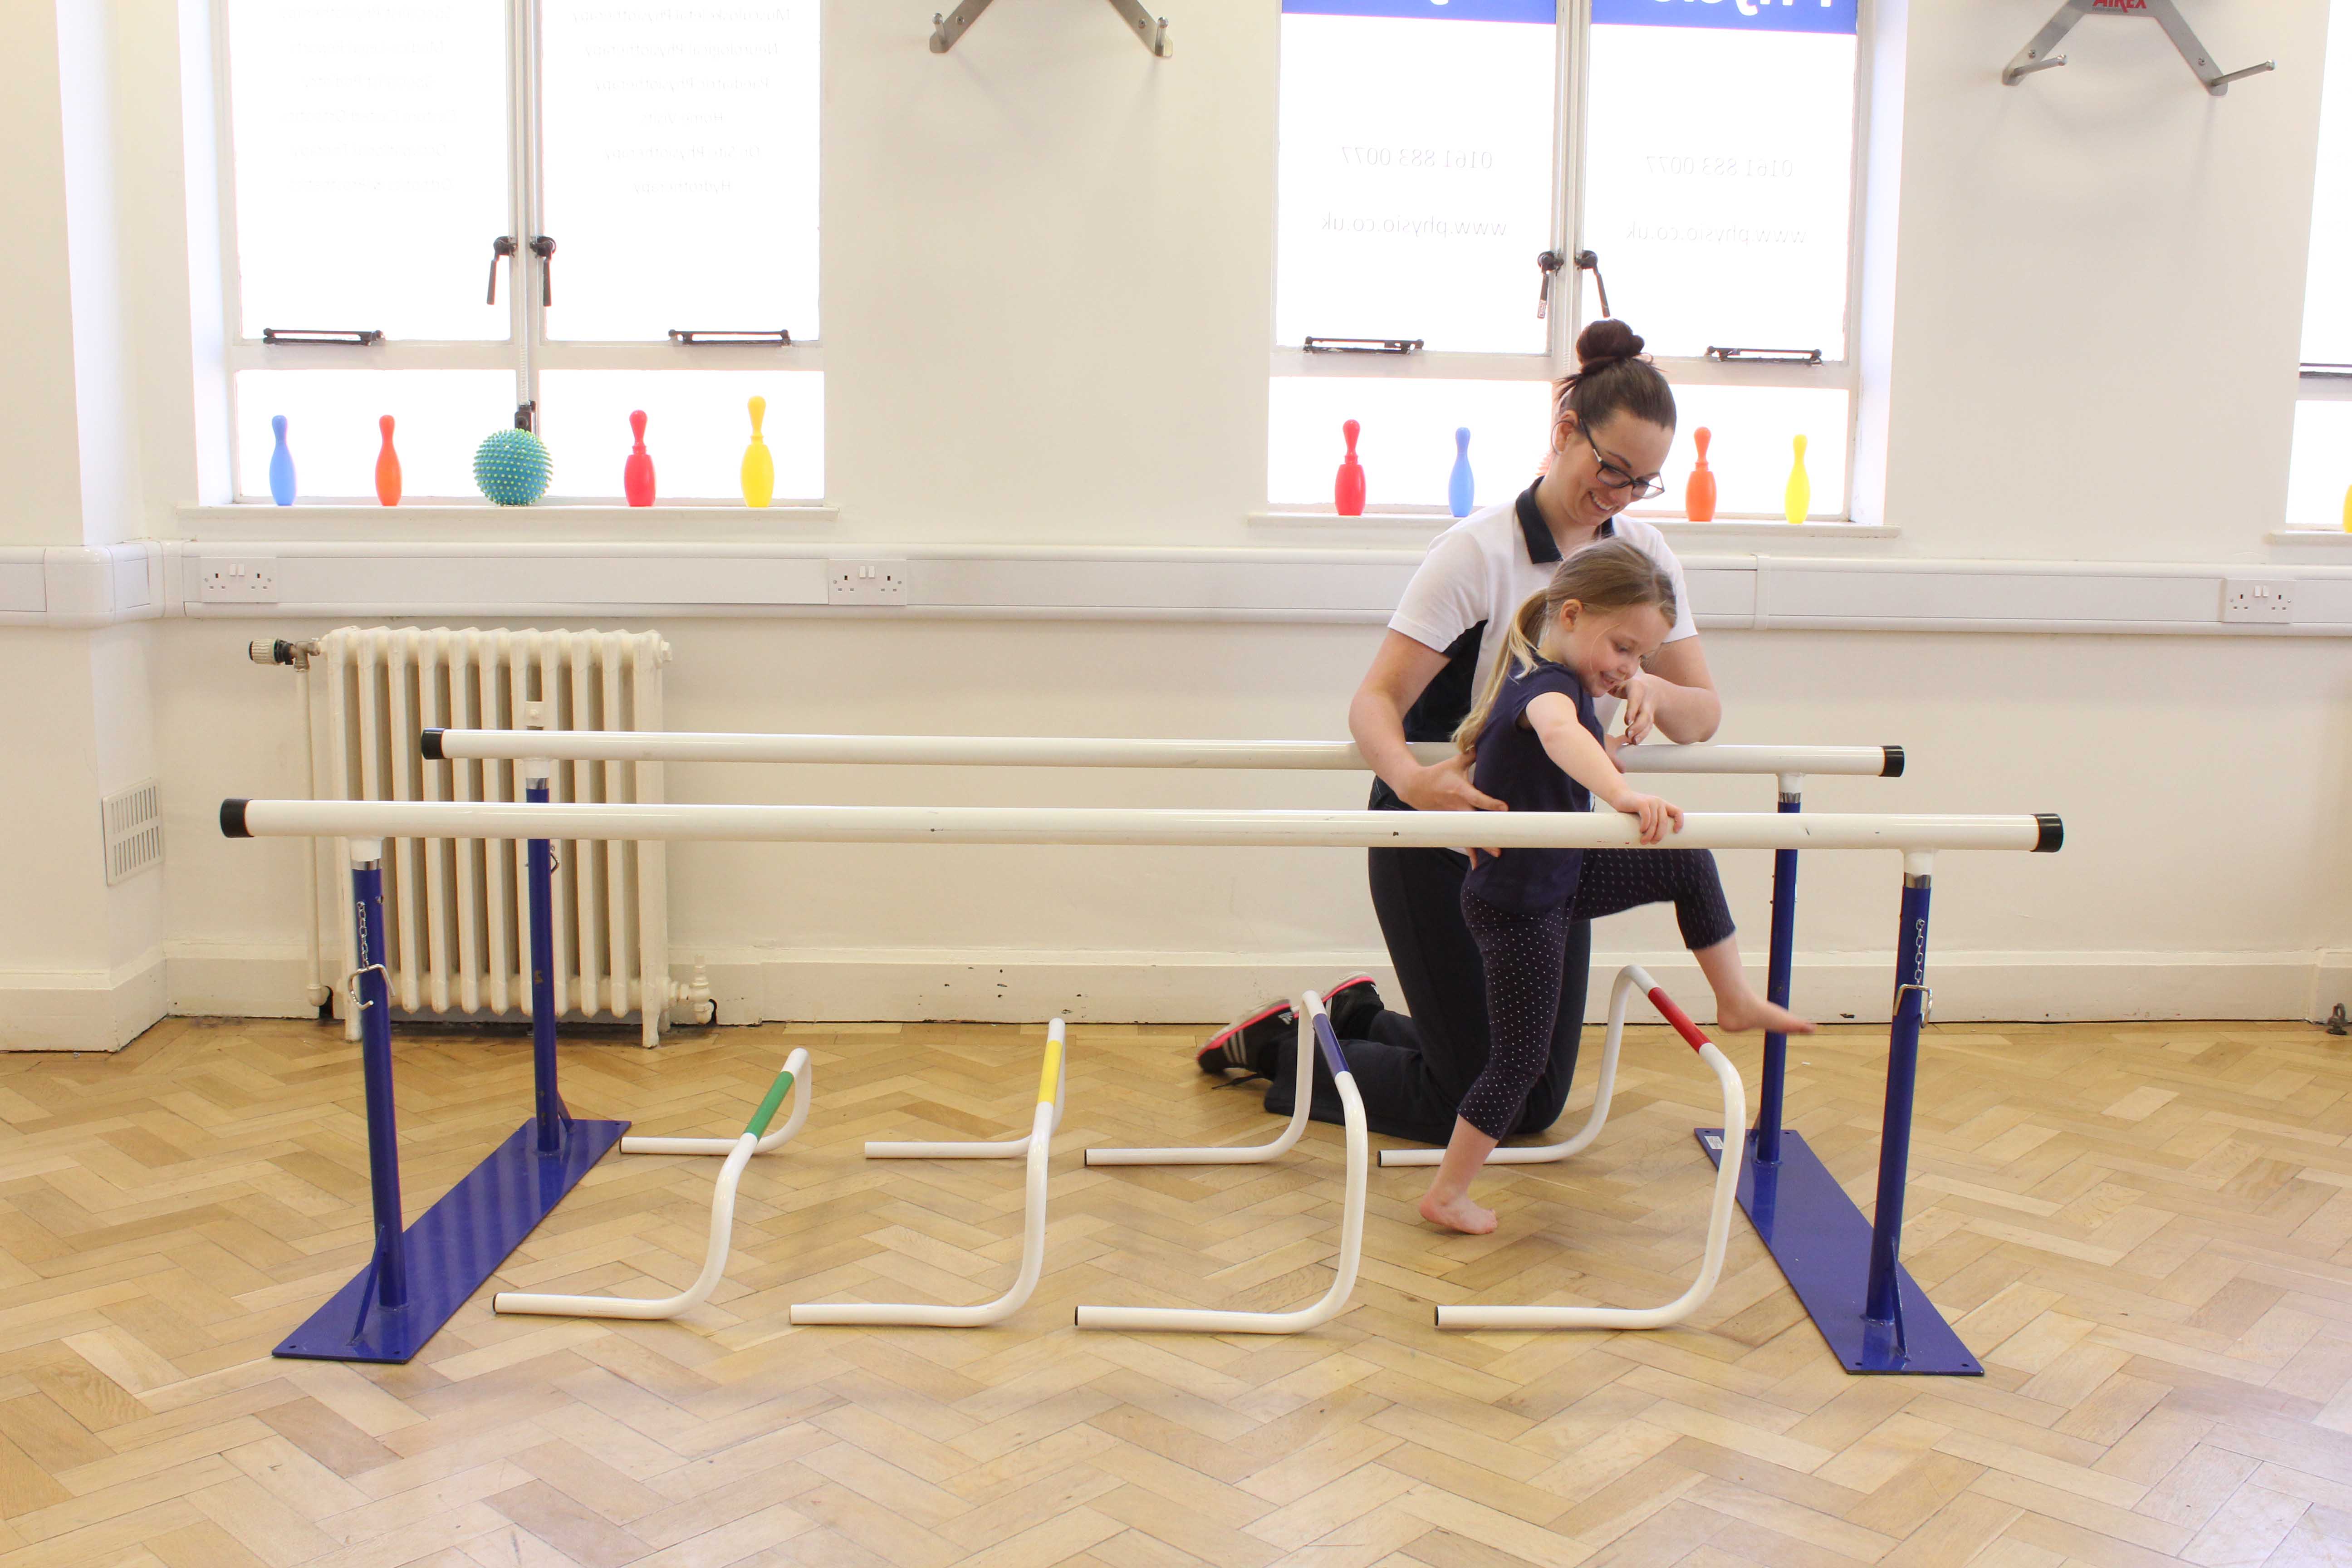 Paediatric neuro physiotherapist supervising mobility exercises between the parallel bars